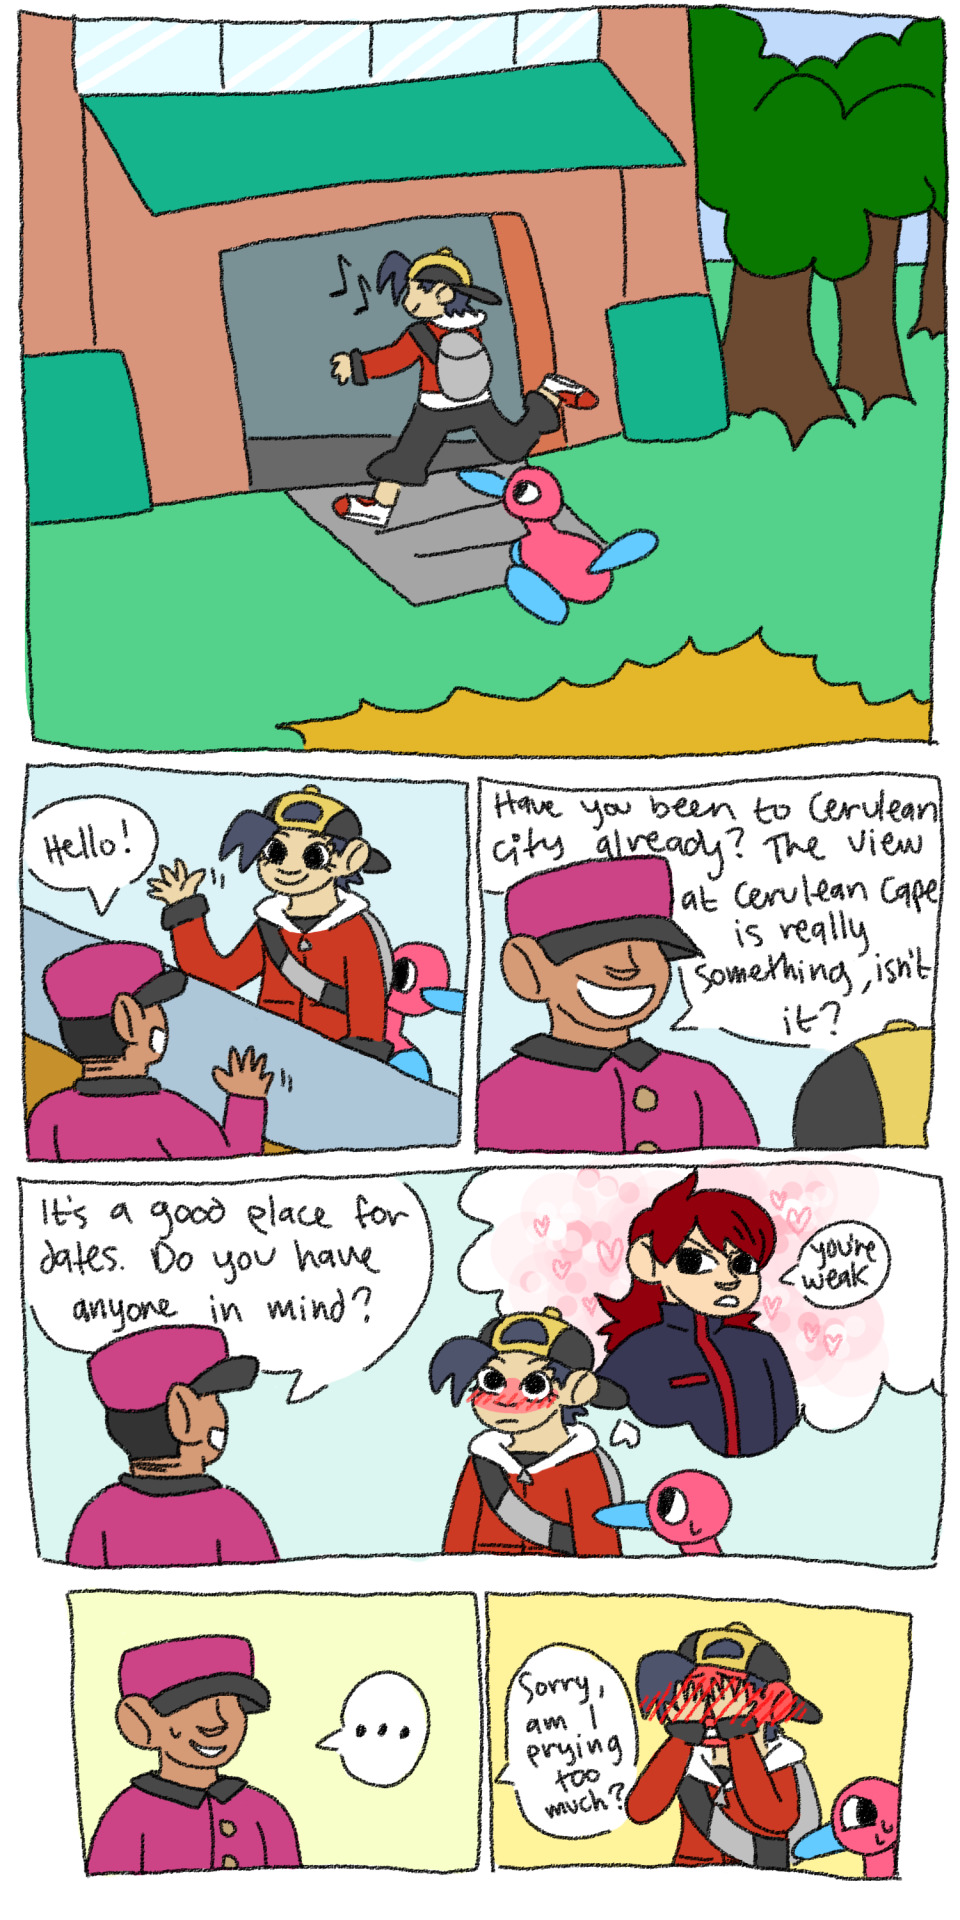 he’s got a bit of a crush #pokemon#hgss#gold#trainer gold#preciousmetalshipping#my art #that gate dude really does say all of this lol  #plus a little more but it wouldnt all fit